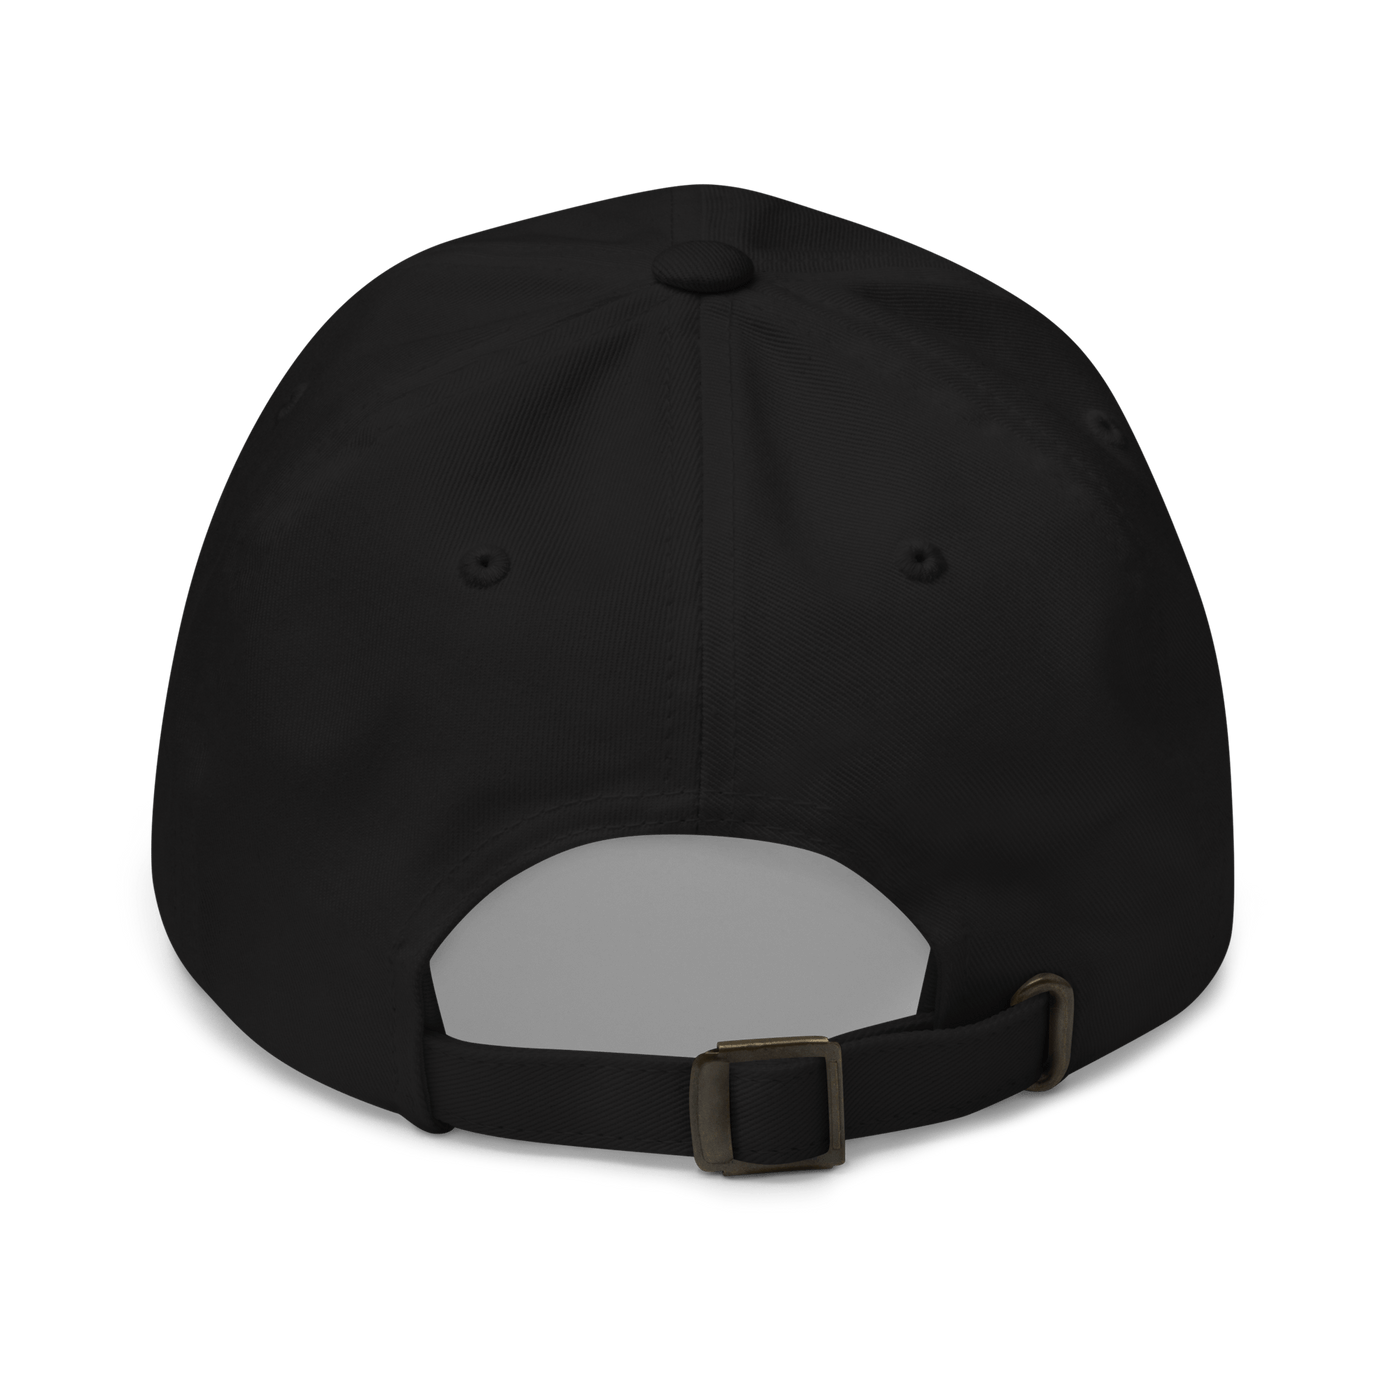 Cappuccino Dad hat - Black - - Just Another Cap Store